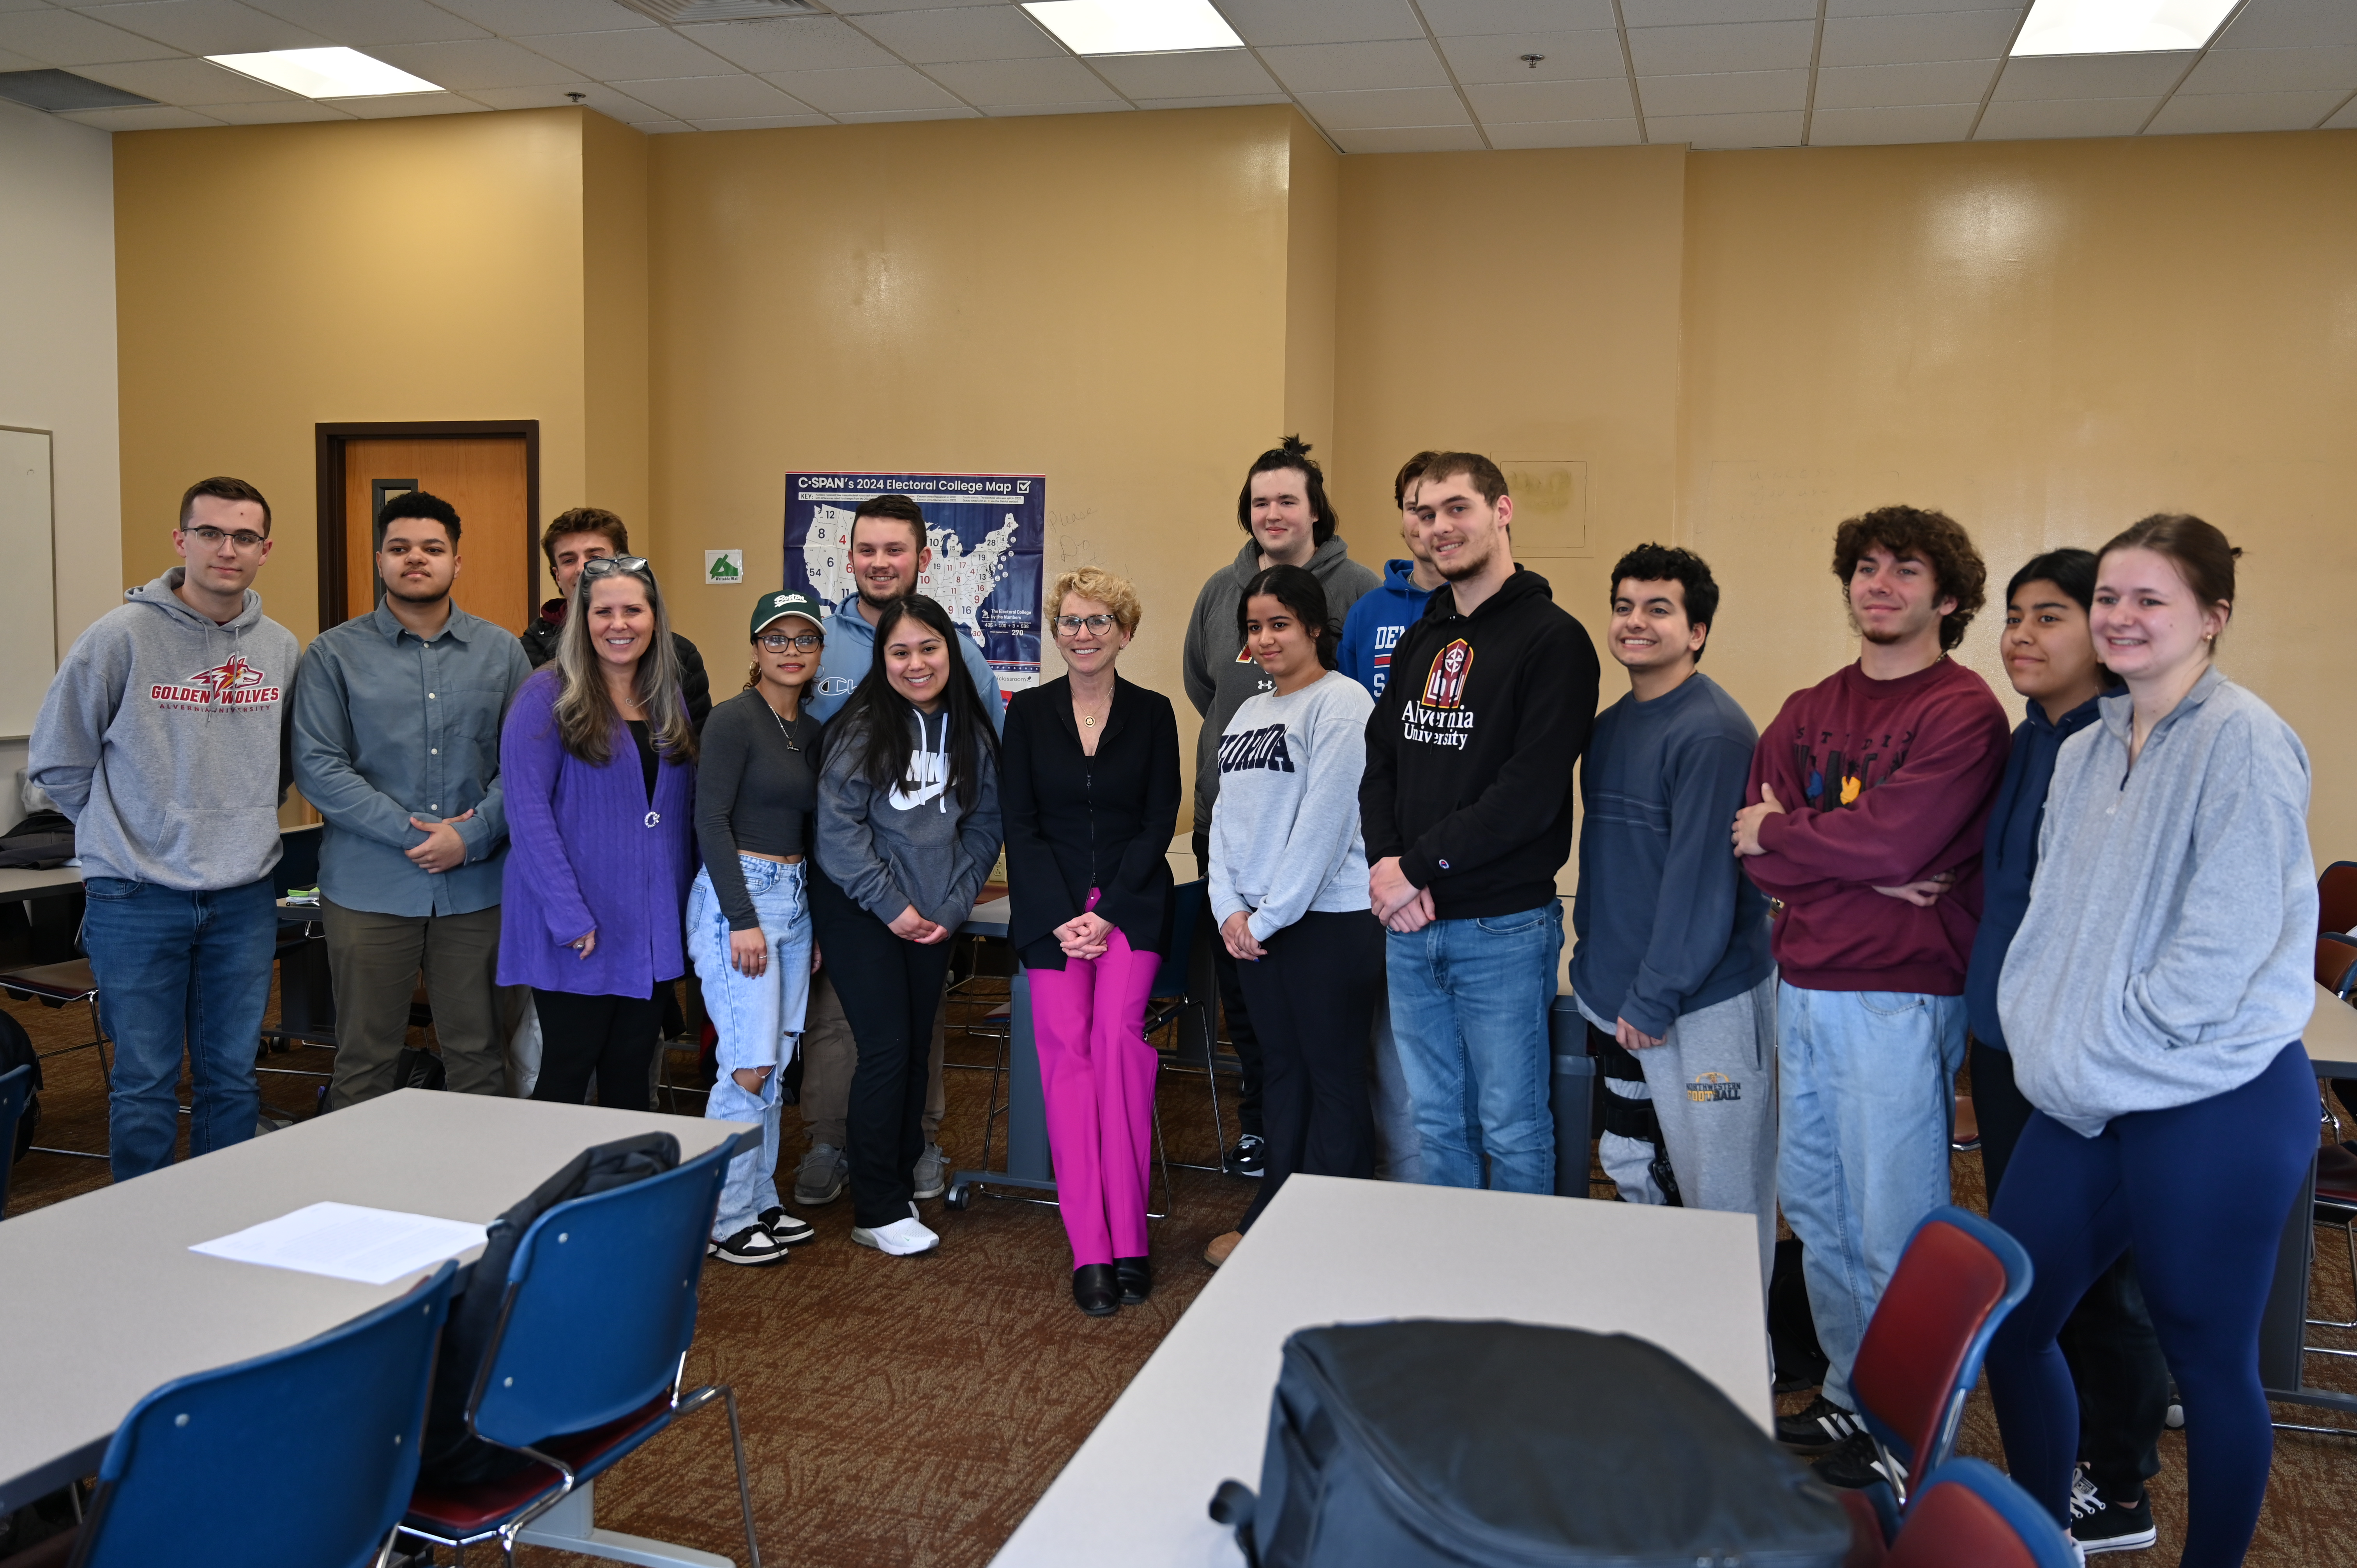 Houlahan poses for photo with Alvernia University students